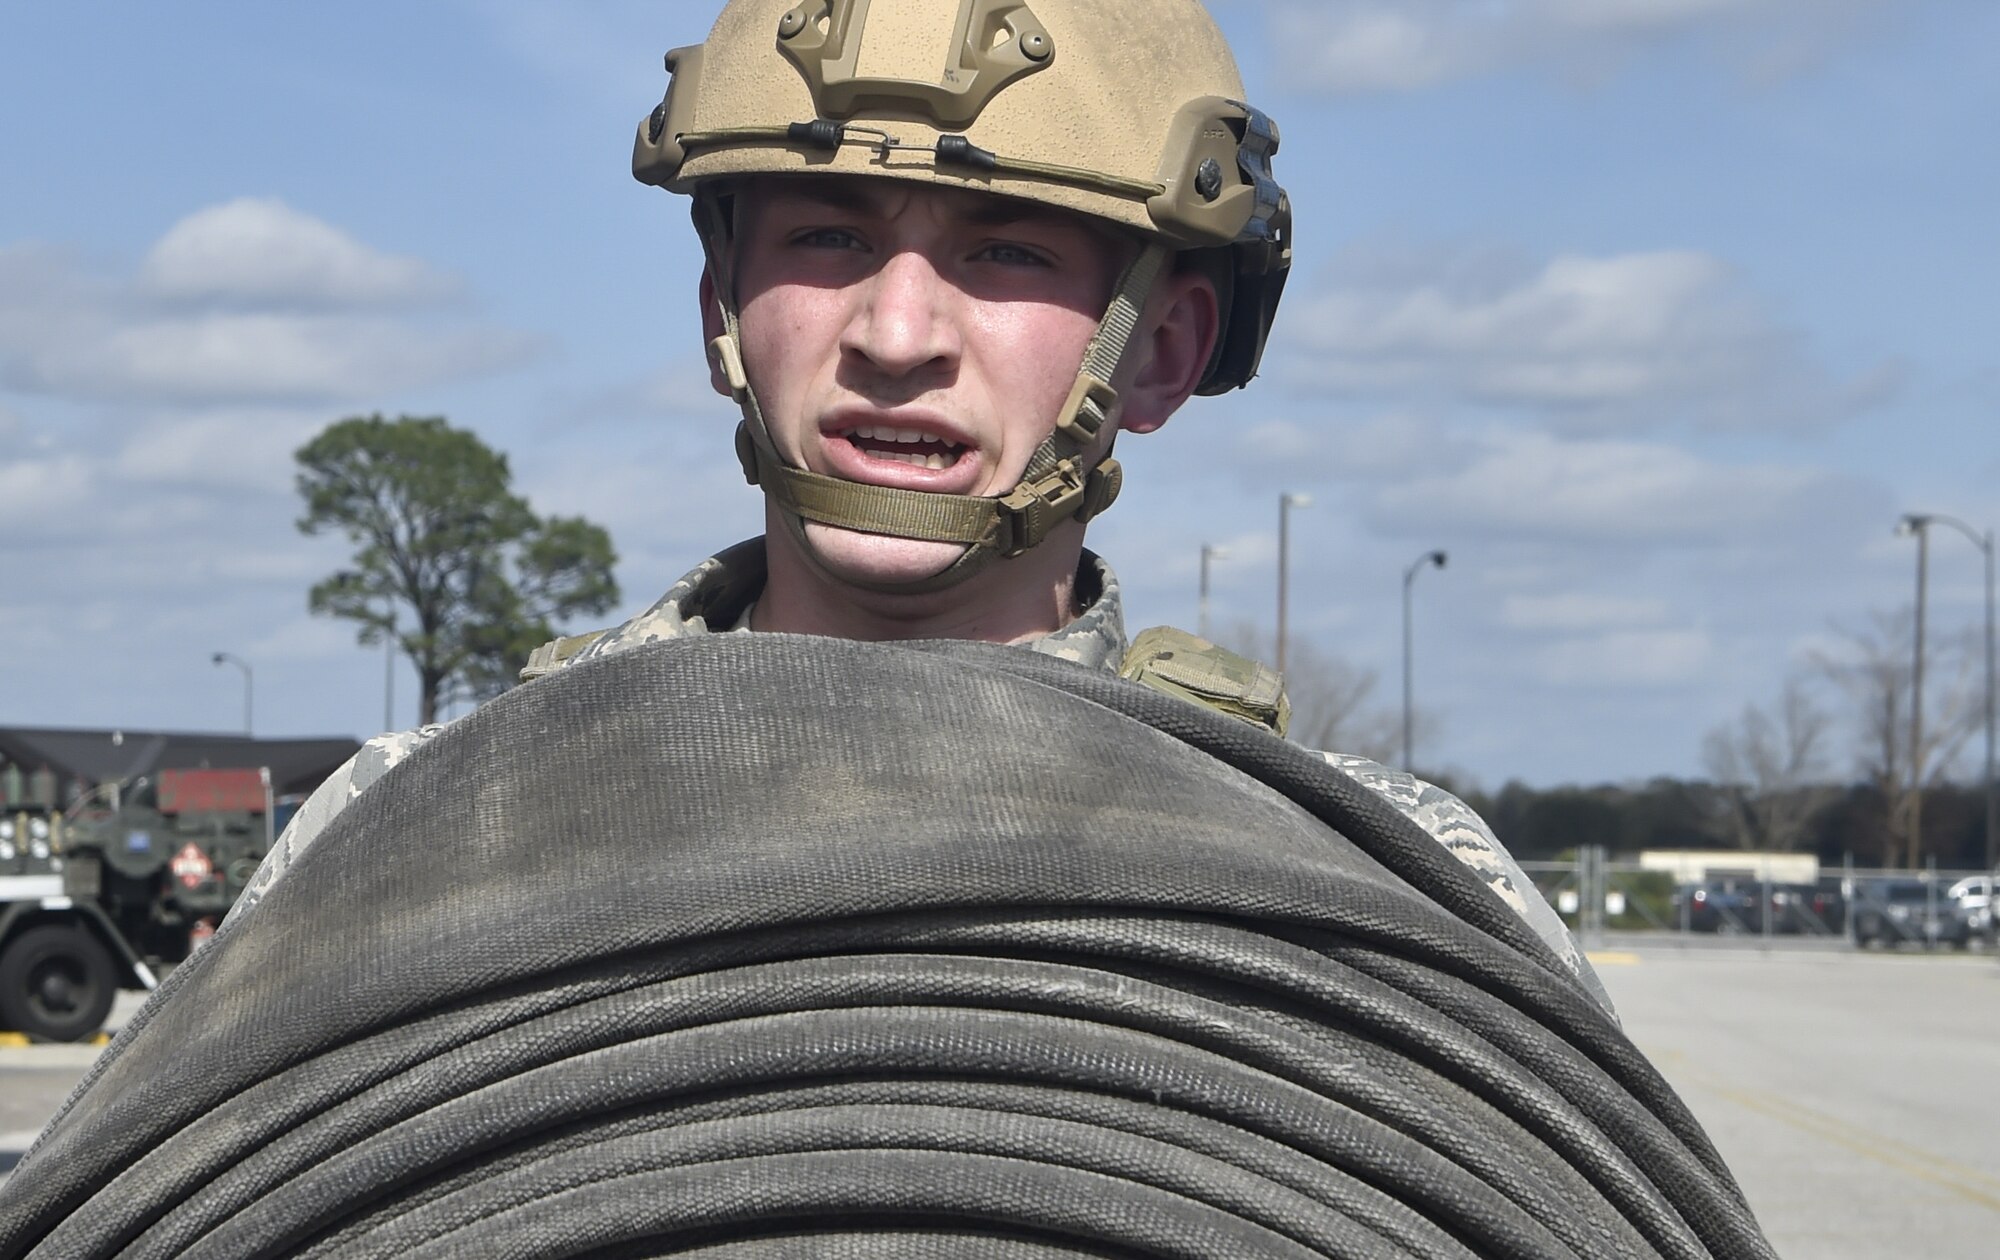 Airman 1st Class Nathan Lynch, 628th Logistics Readiness Squadron fuels distribution operator, carries a fire hose as part of a tryout for the Forward Area Refueling Point team here Feb. 15, 2018.